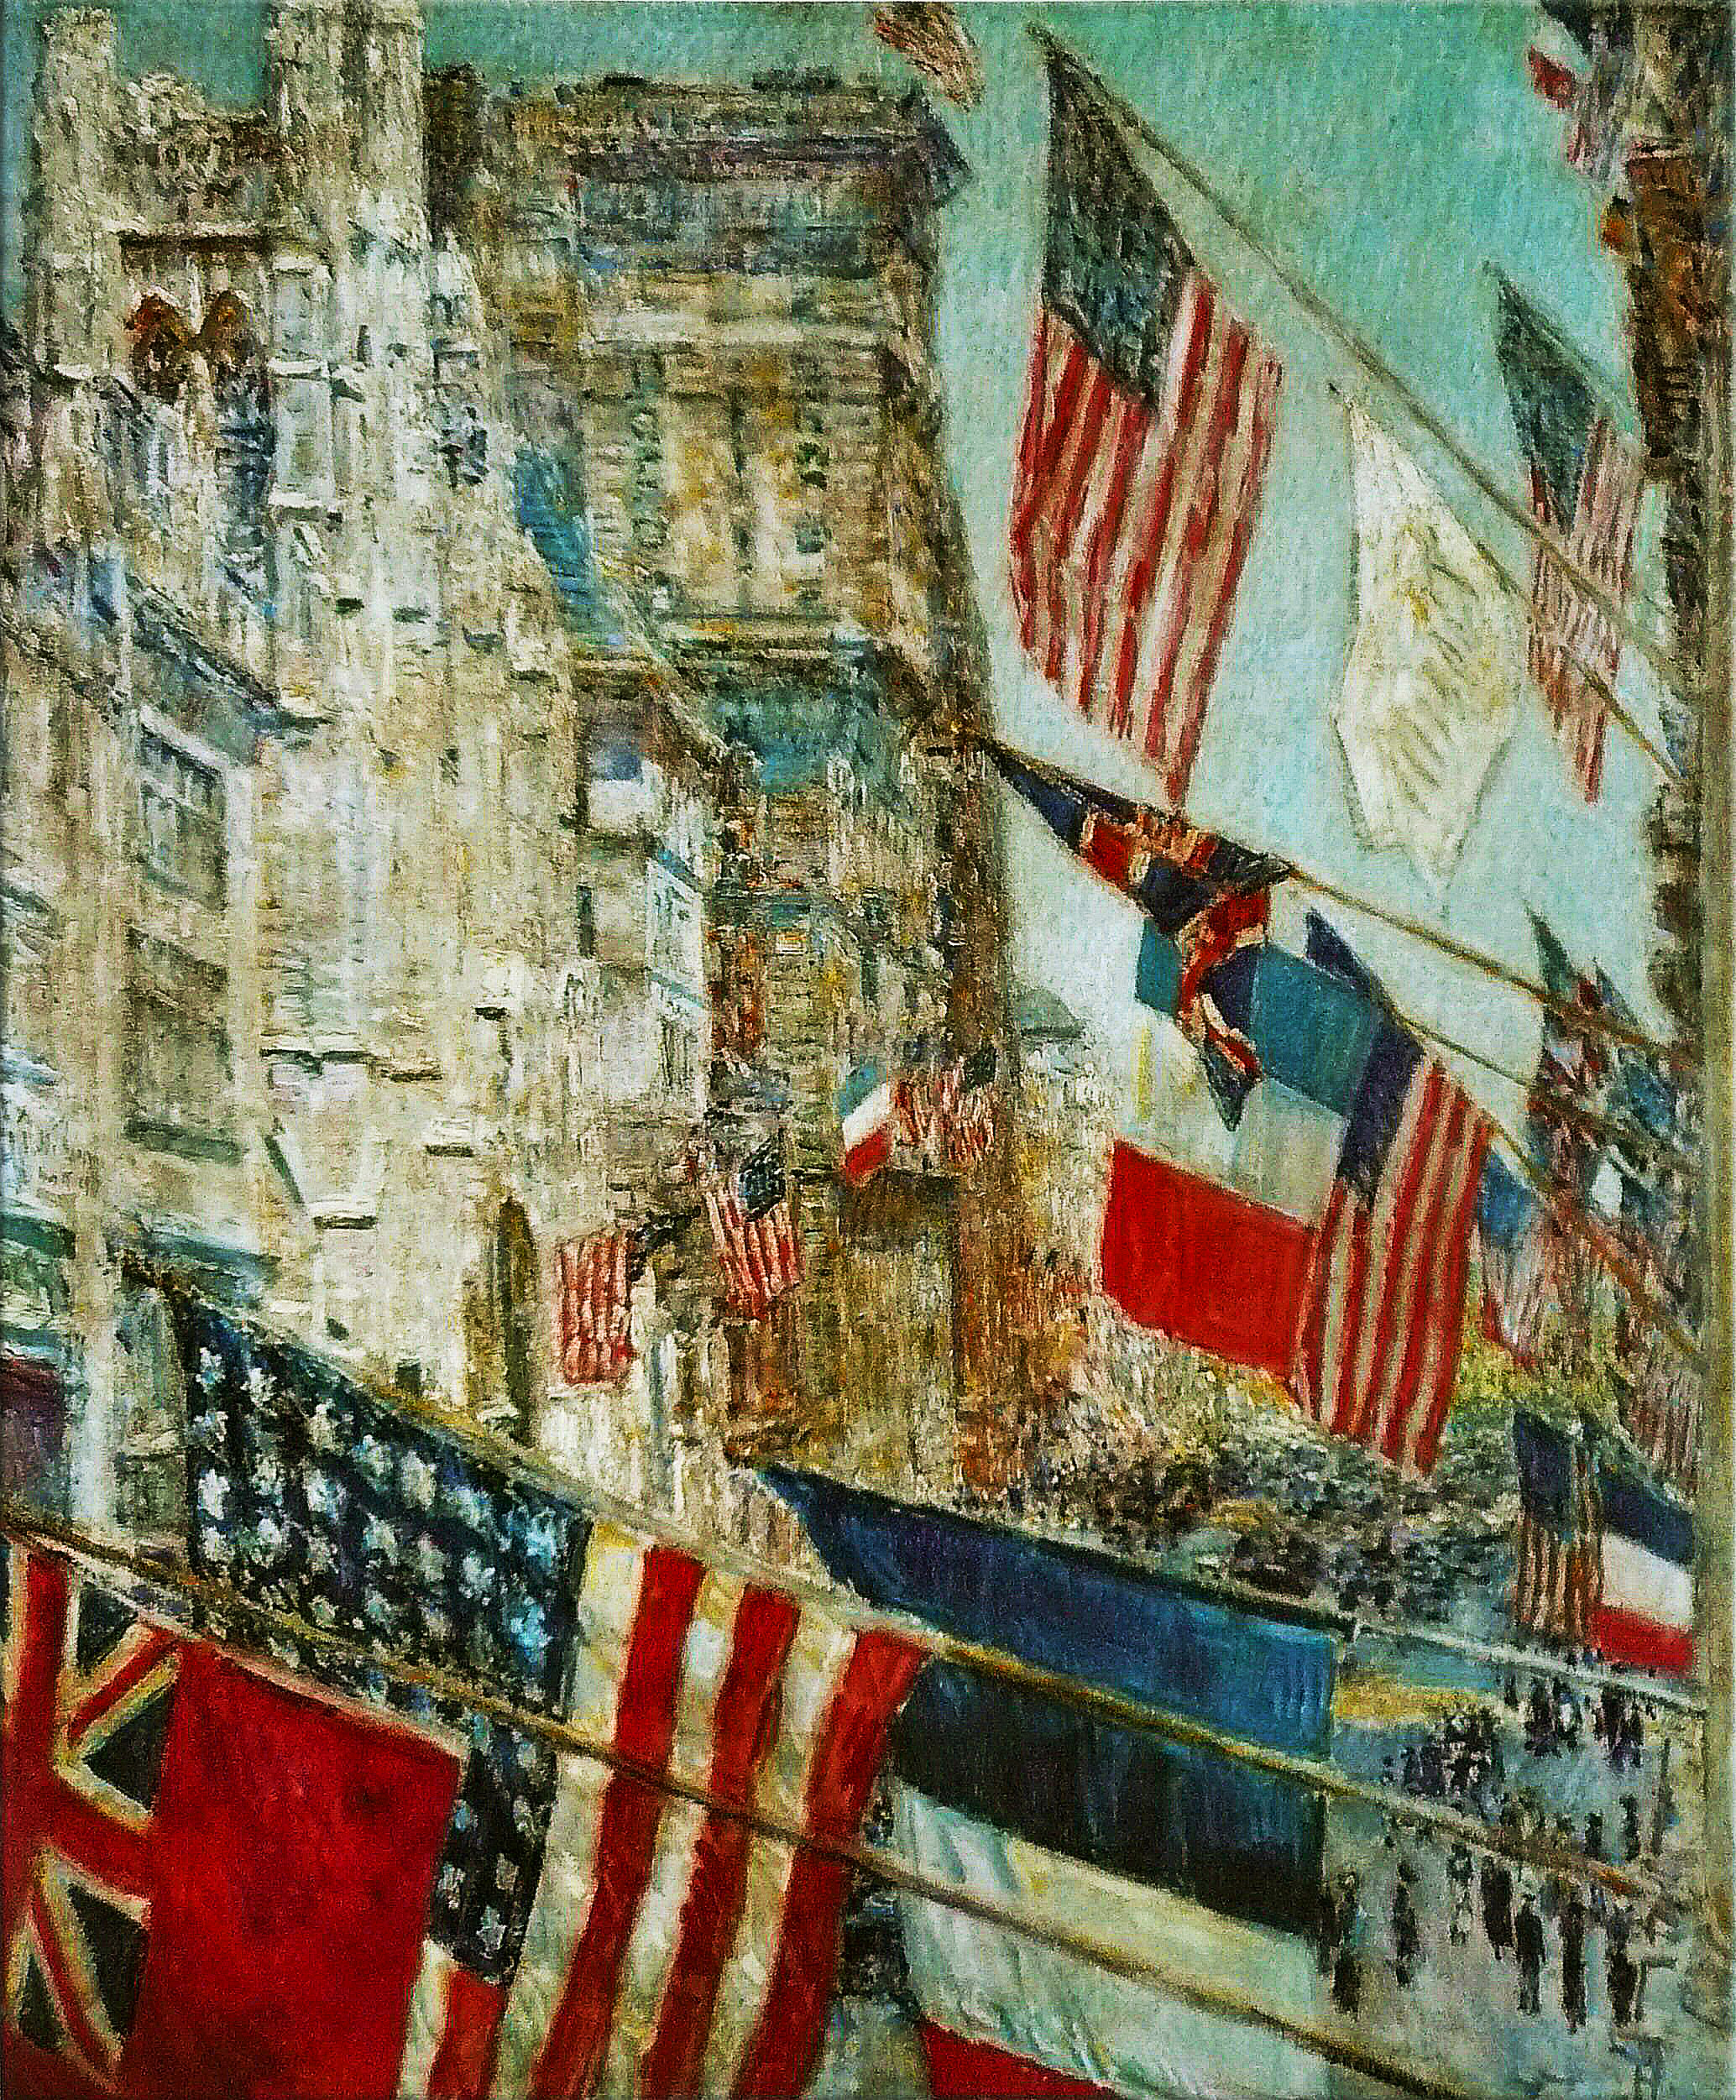 Allies Day, May 1917, National Gallery of Art